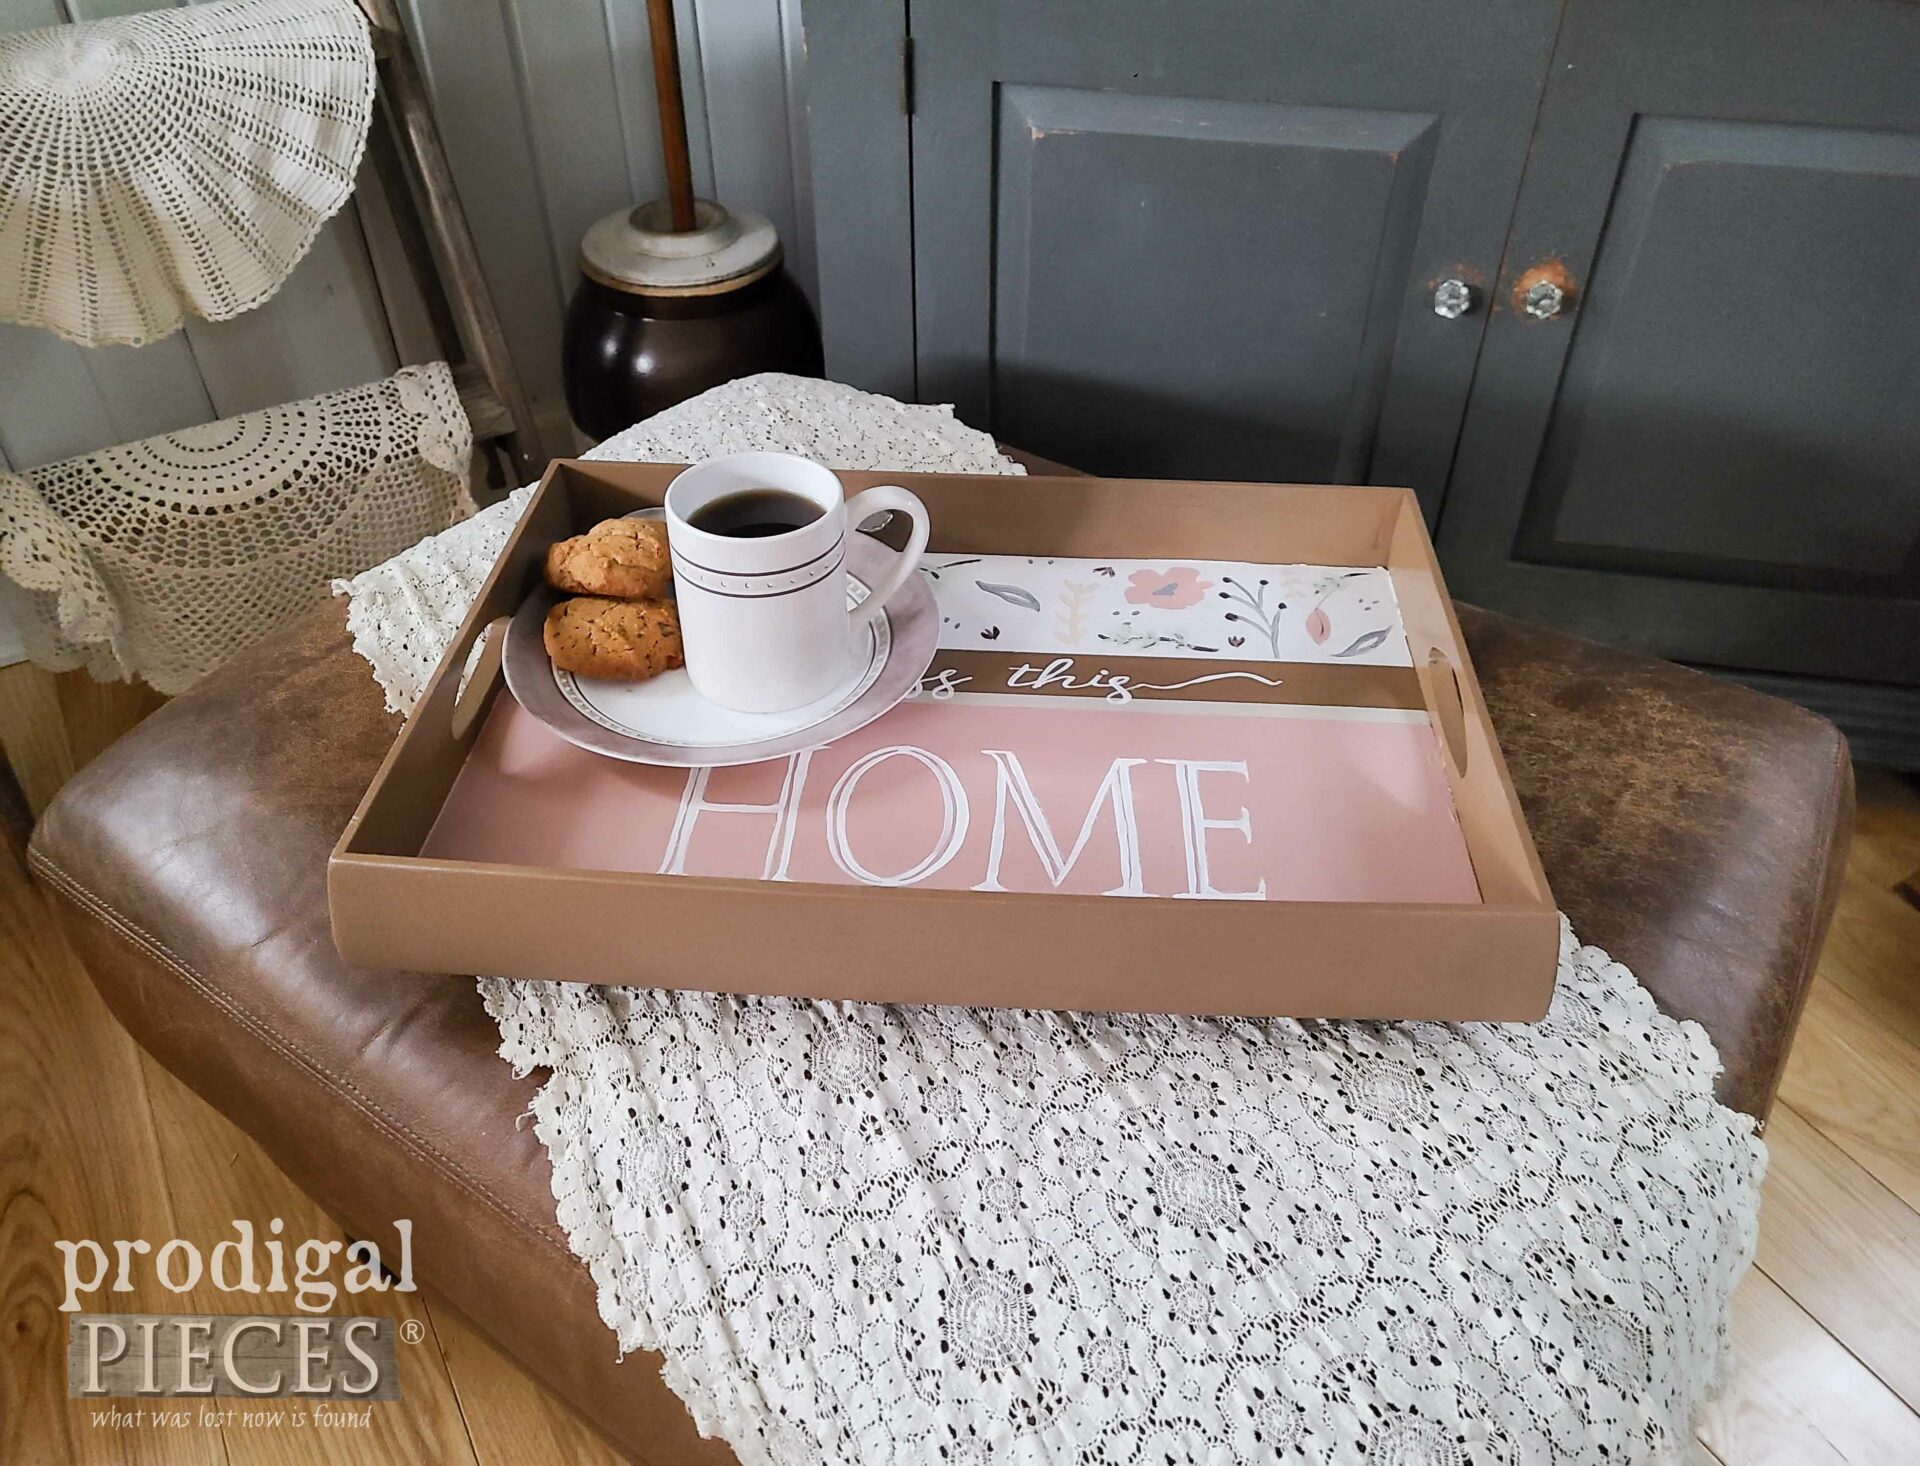 Modern Farmhouse Serving Tray from Thrift Store Find by Larissa of Prodigal Pieces | prodigalpieces.com #prodigalpieces #farmhouse #diy #thrifted